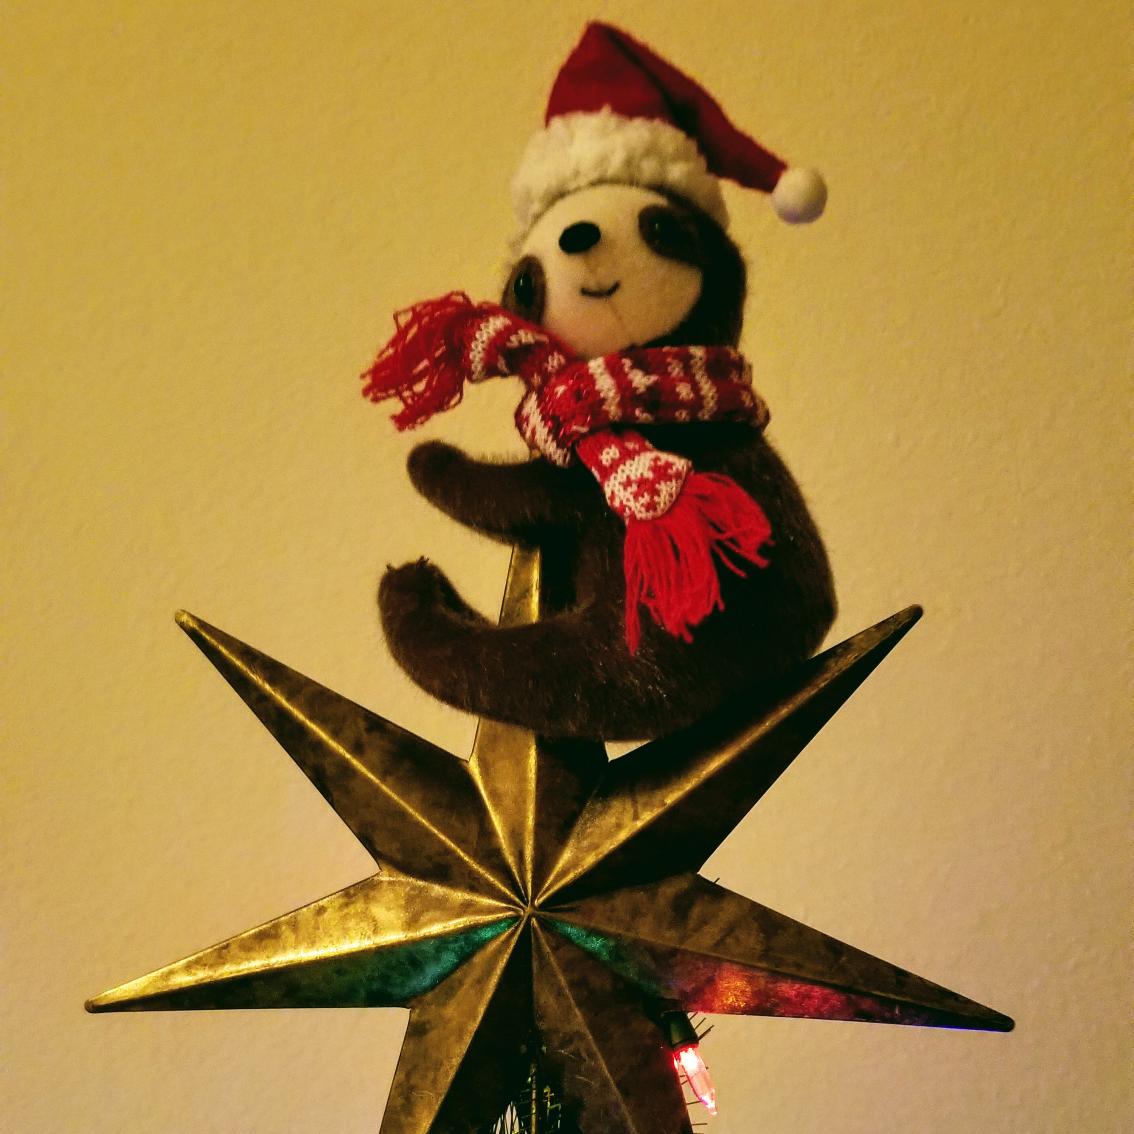 They finale to my great countdown: our Santa Sloth tree topper! Yay!!!

#ornamentoftheday #holidayseason